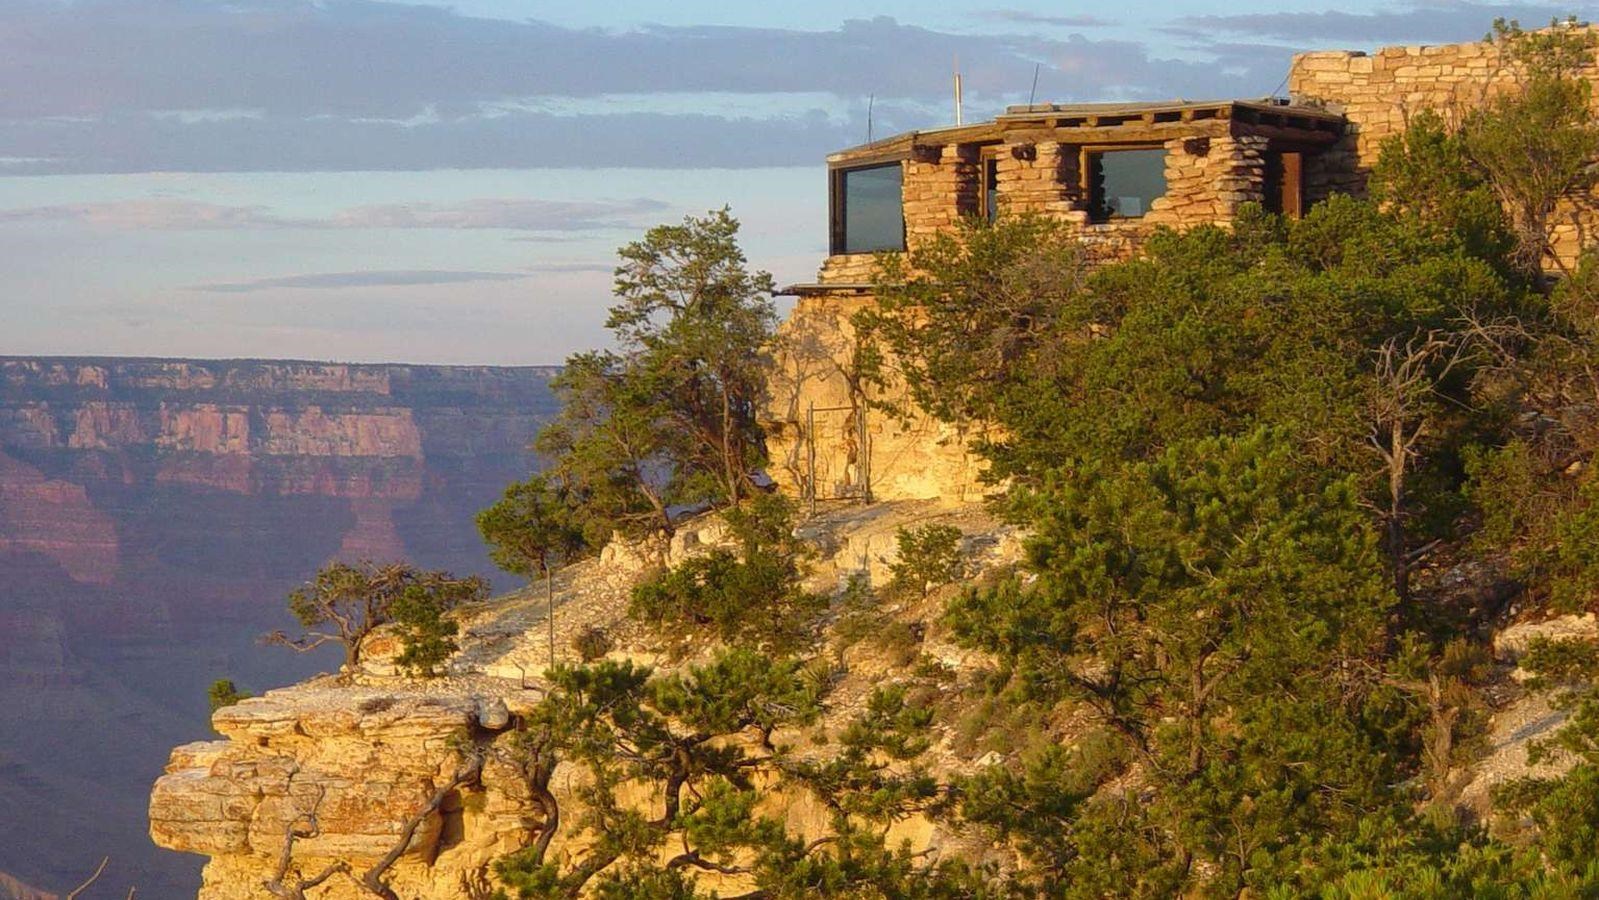 A rustic stone building with large windows on the edge of a cliff overlooking a canyon.